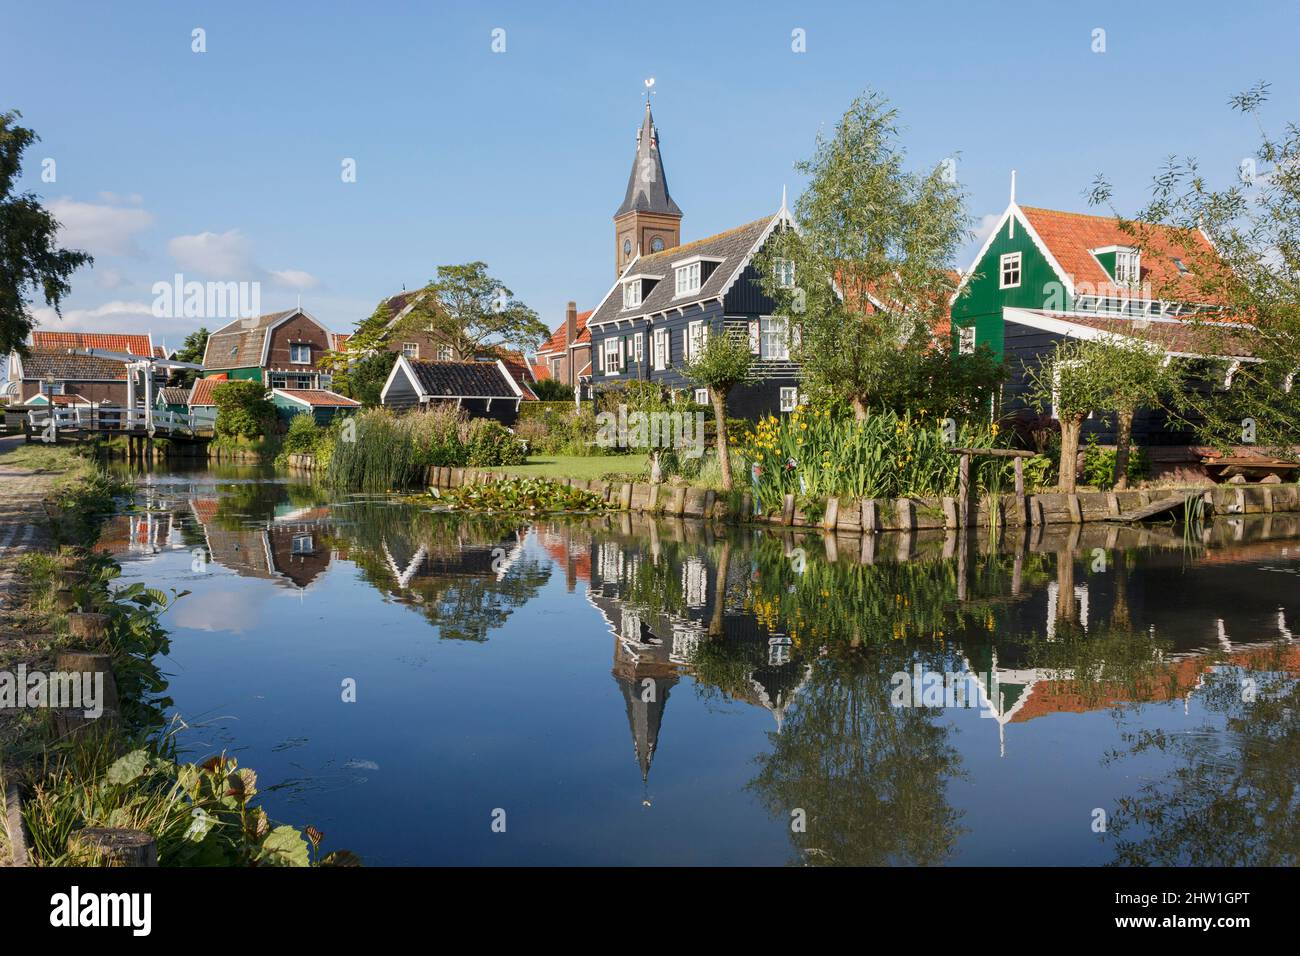 Netherlands, North Holland, Marken, church and typical wooden houses painted in green and black Stock Photo